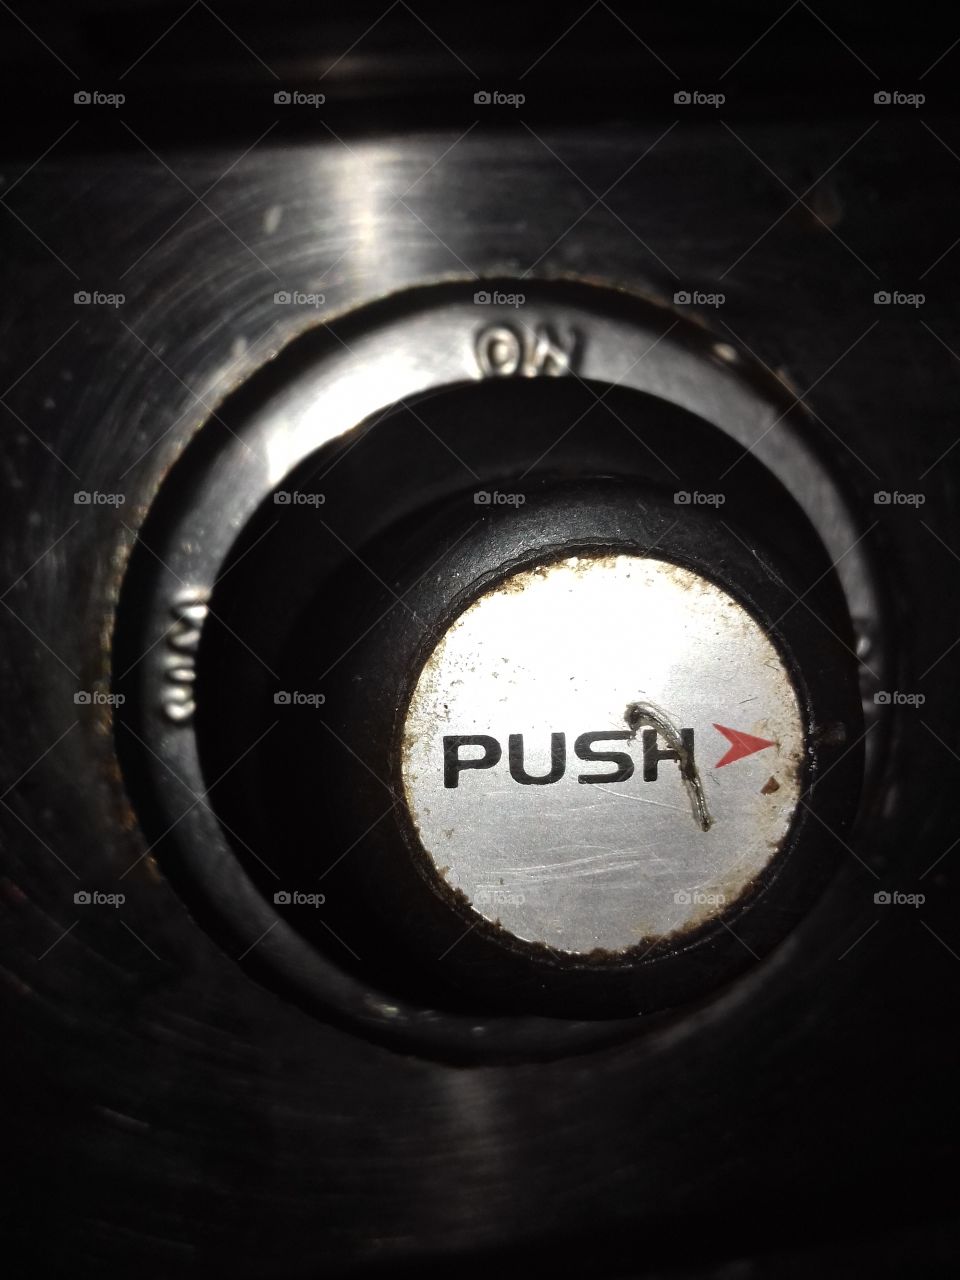 push button on gas stove old but in use and noticeable is the red indication depicting direction